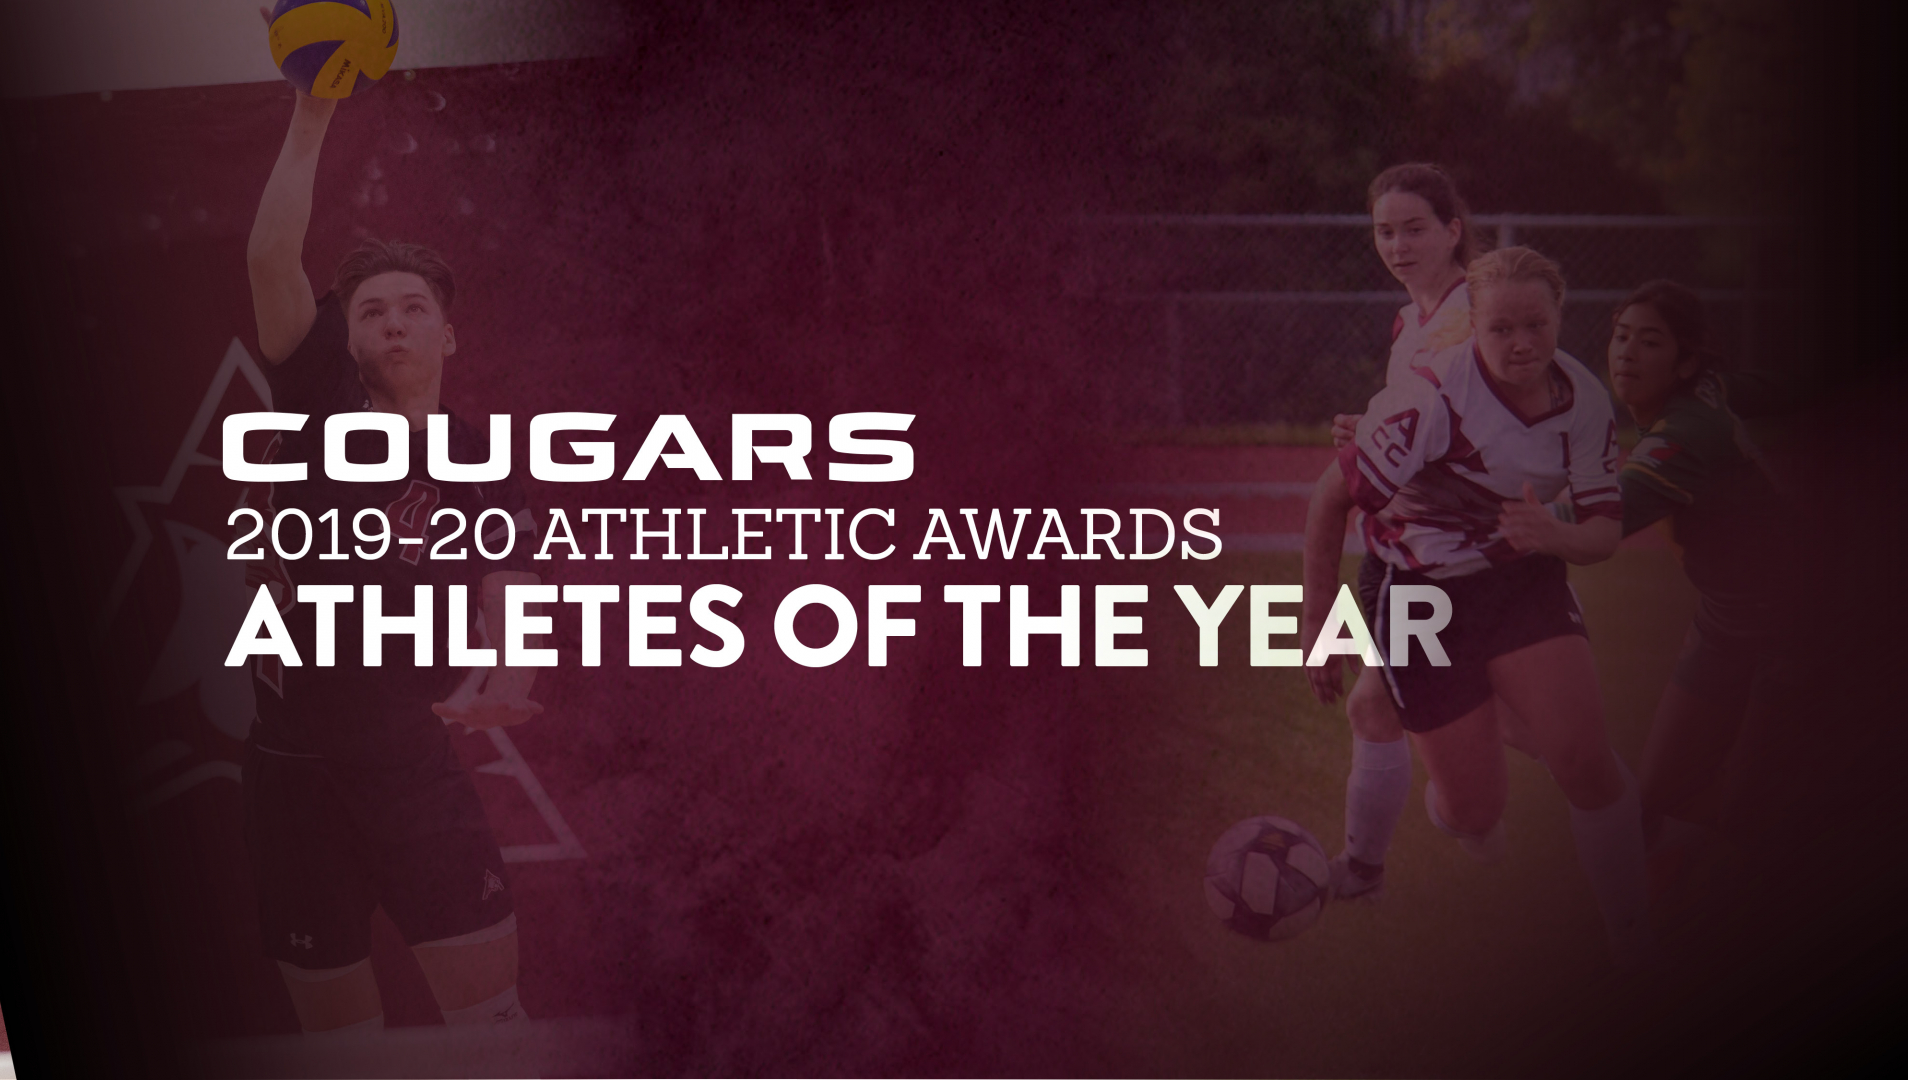 Cougars’ Athletes of the Year